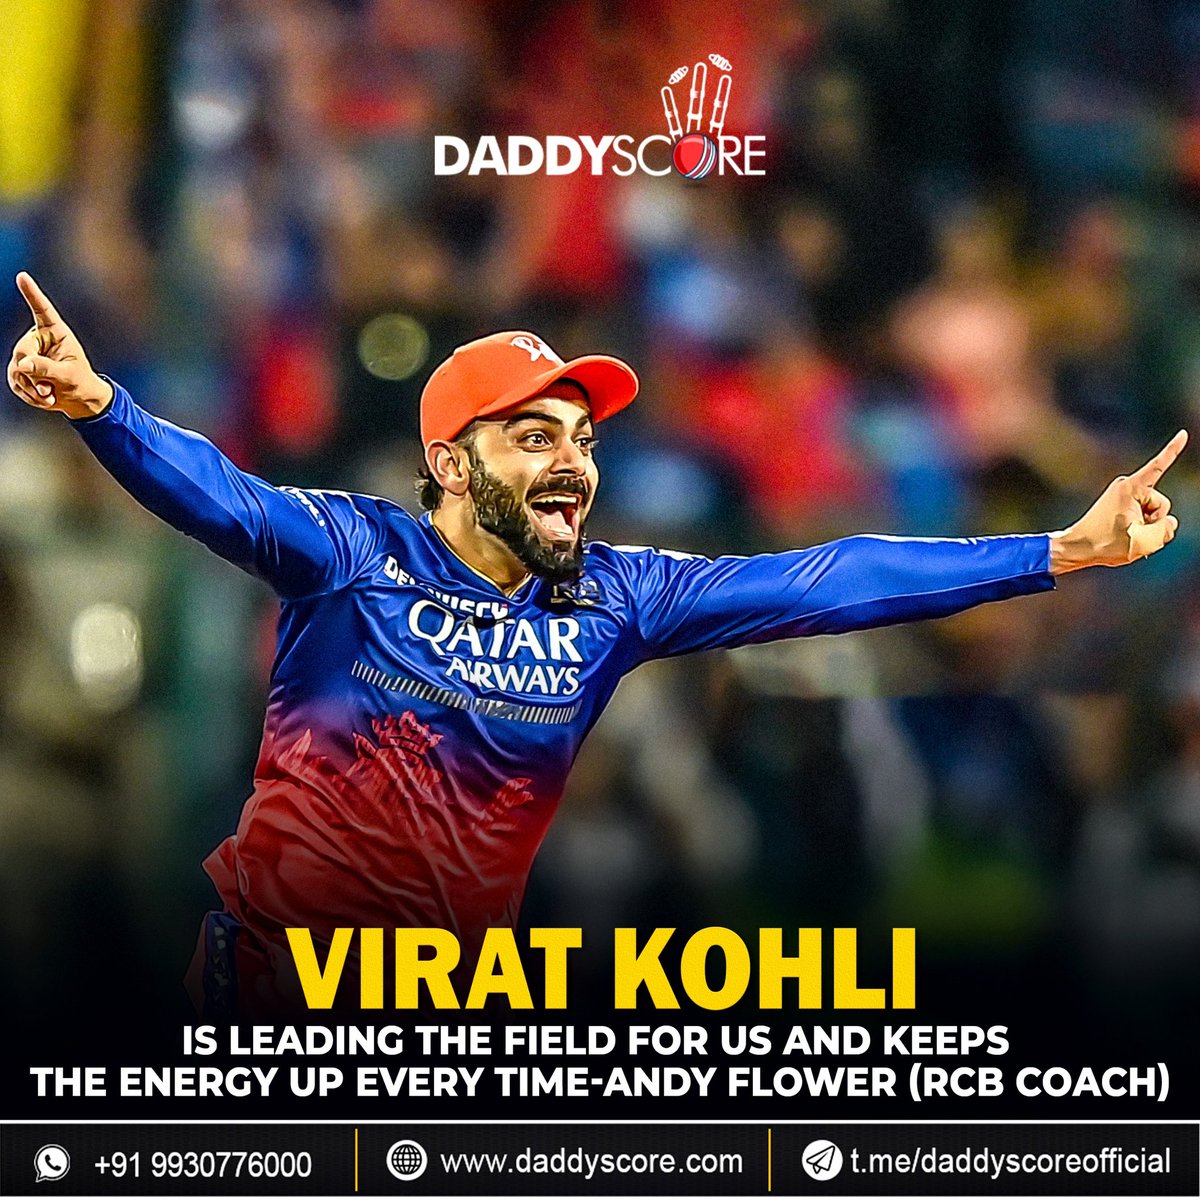 Virat Kohli is leading the field for us and keeps the energy up every time- Andy Flower (RCB Coach) #ViratKohli𓃵 | #AndyFlower | #IPL